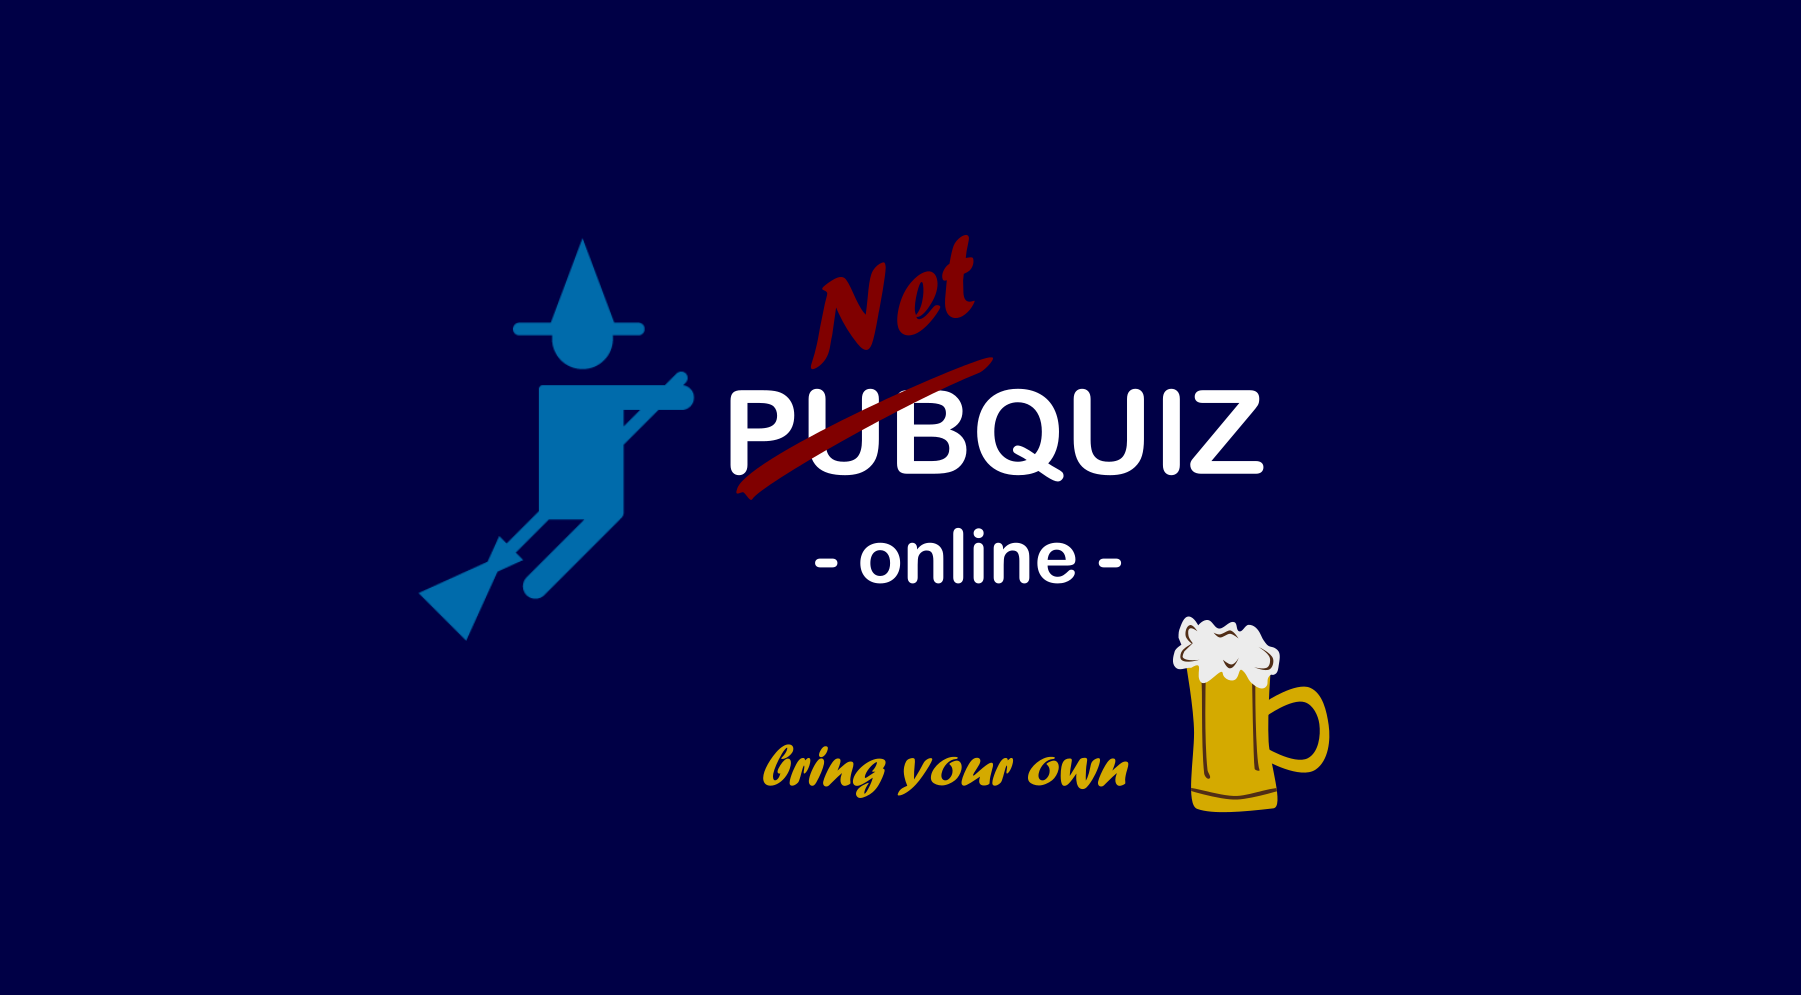 Join our next “NetQuiz” event!